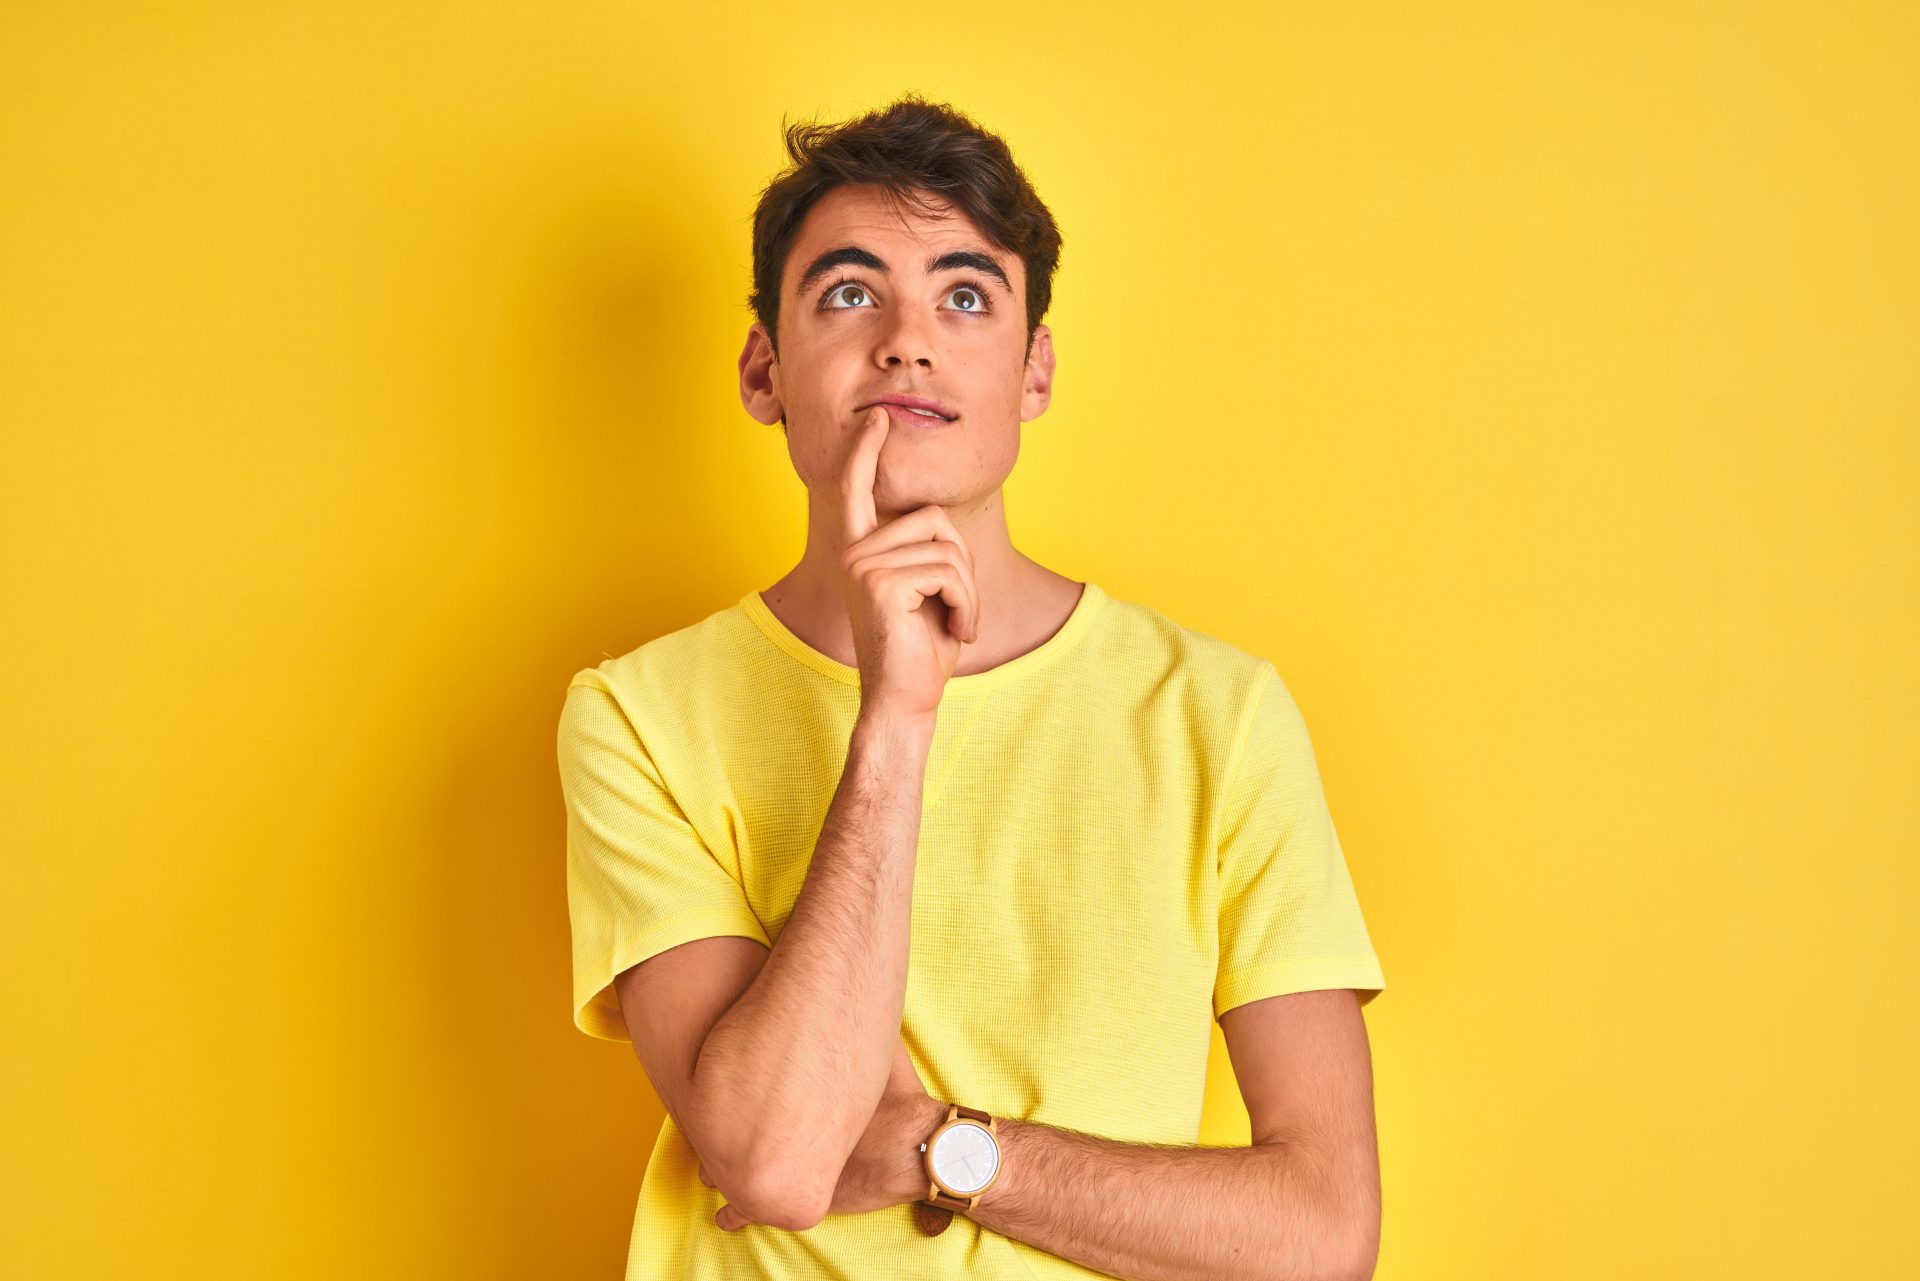 A boy standing with his back against a yellow wall, wearing a yellow T-shirt. He is holding his right hand under his cheek, watching upwards, looking thoughtful.